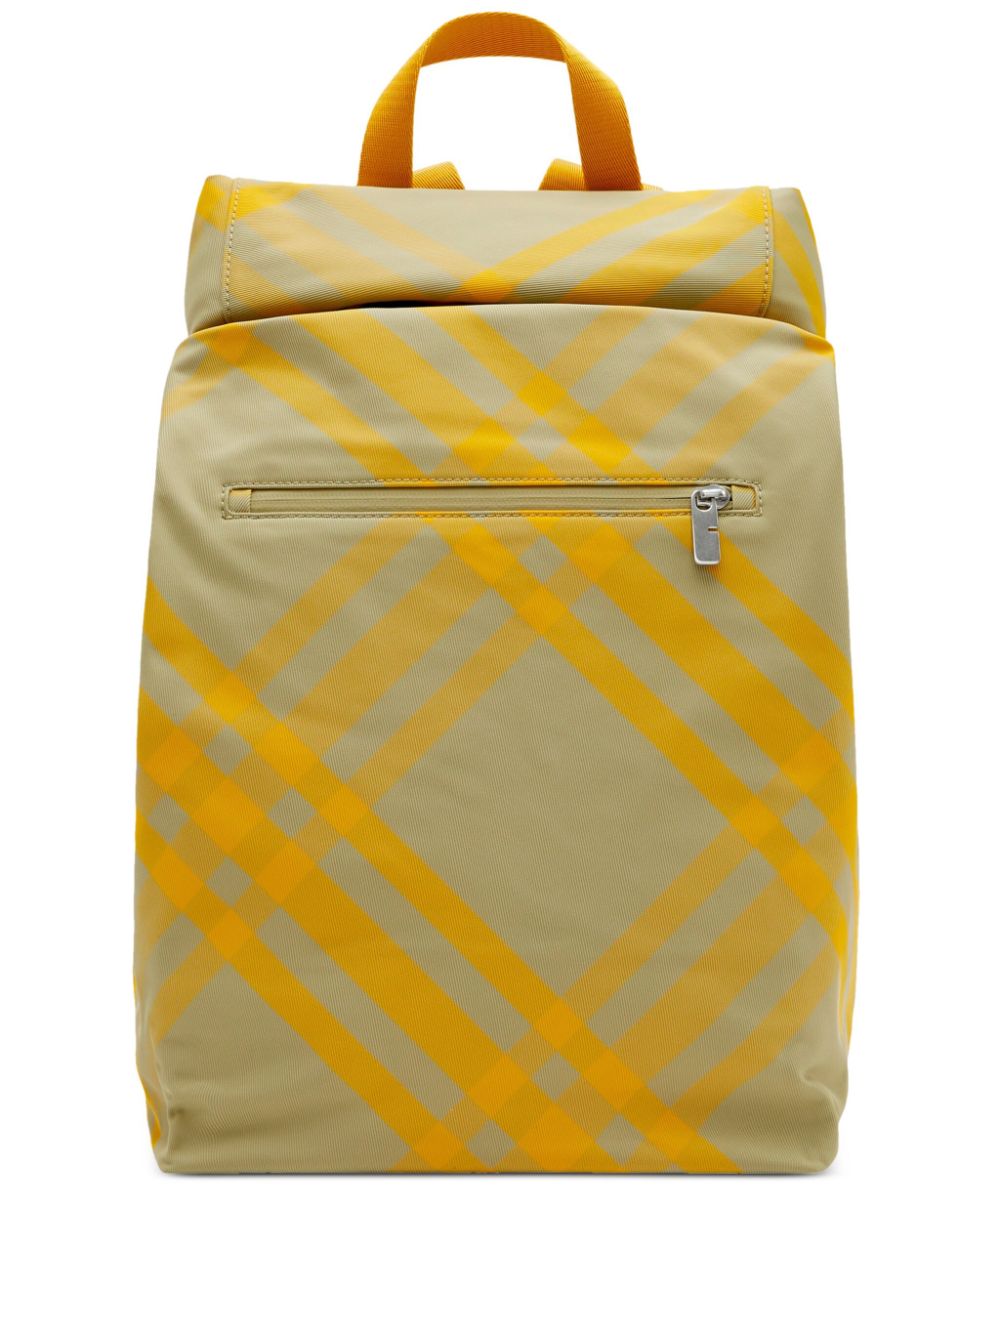 Roll checked backpack